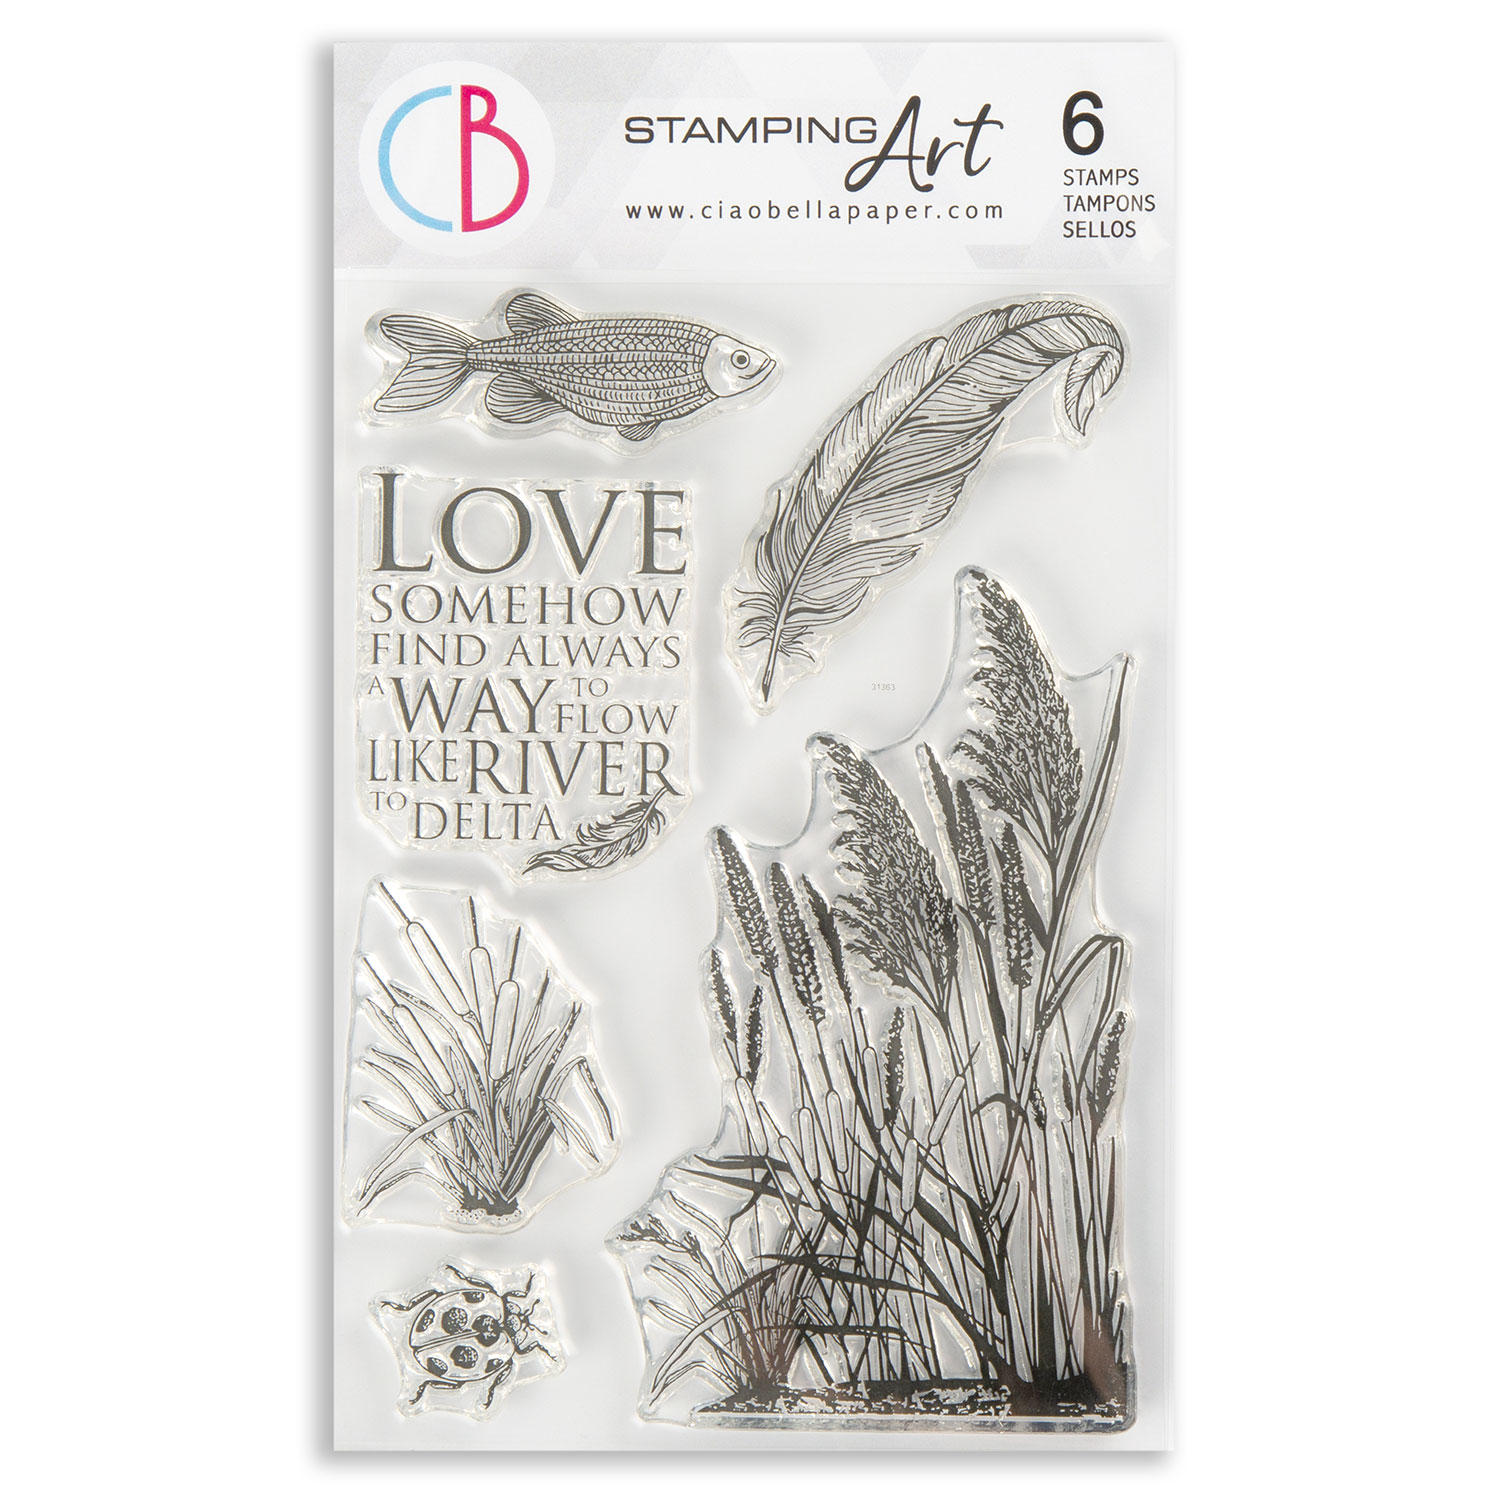 Ciao Bella 2 x 4x6" Stamp Sets - Choose any 2 - Delta's Typha